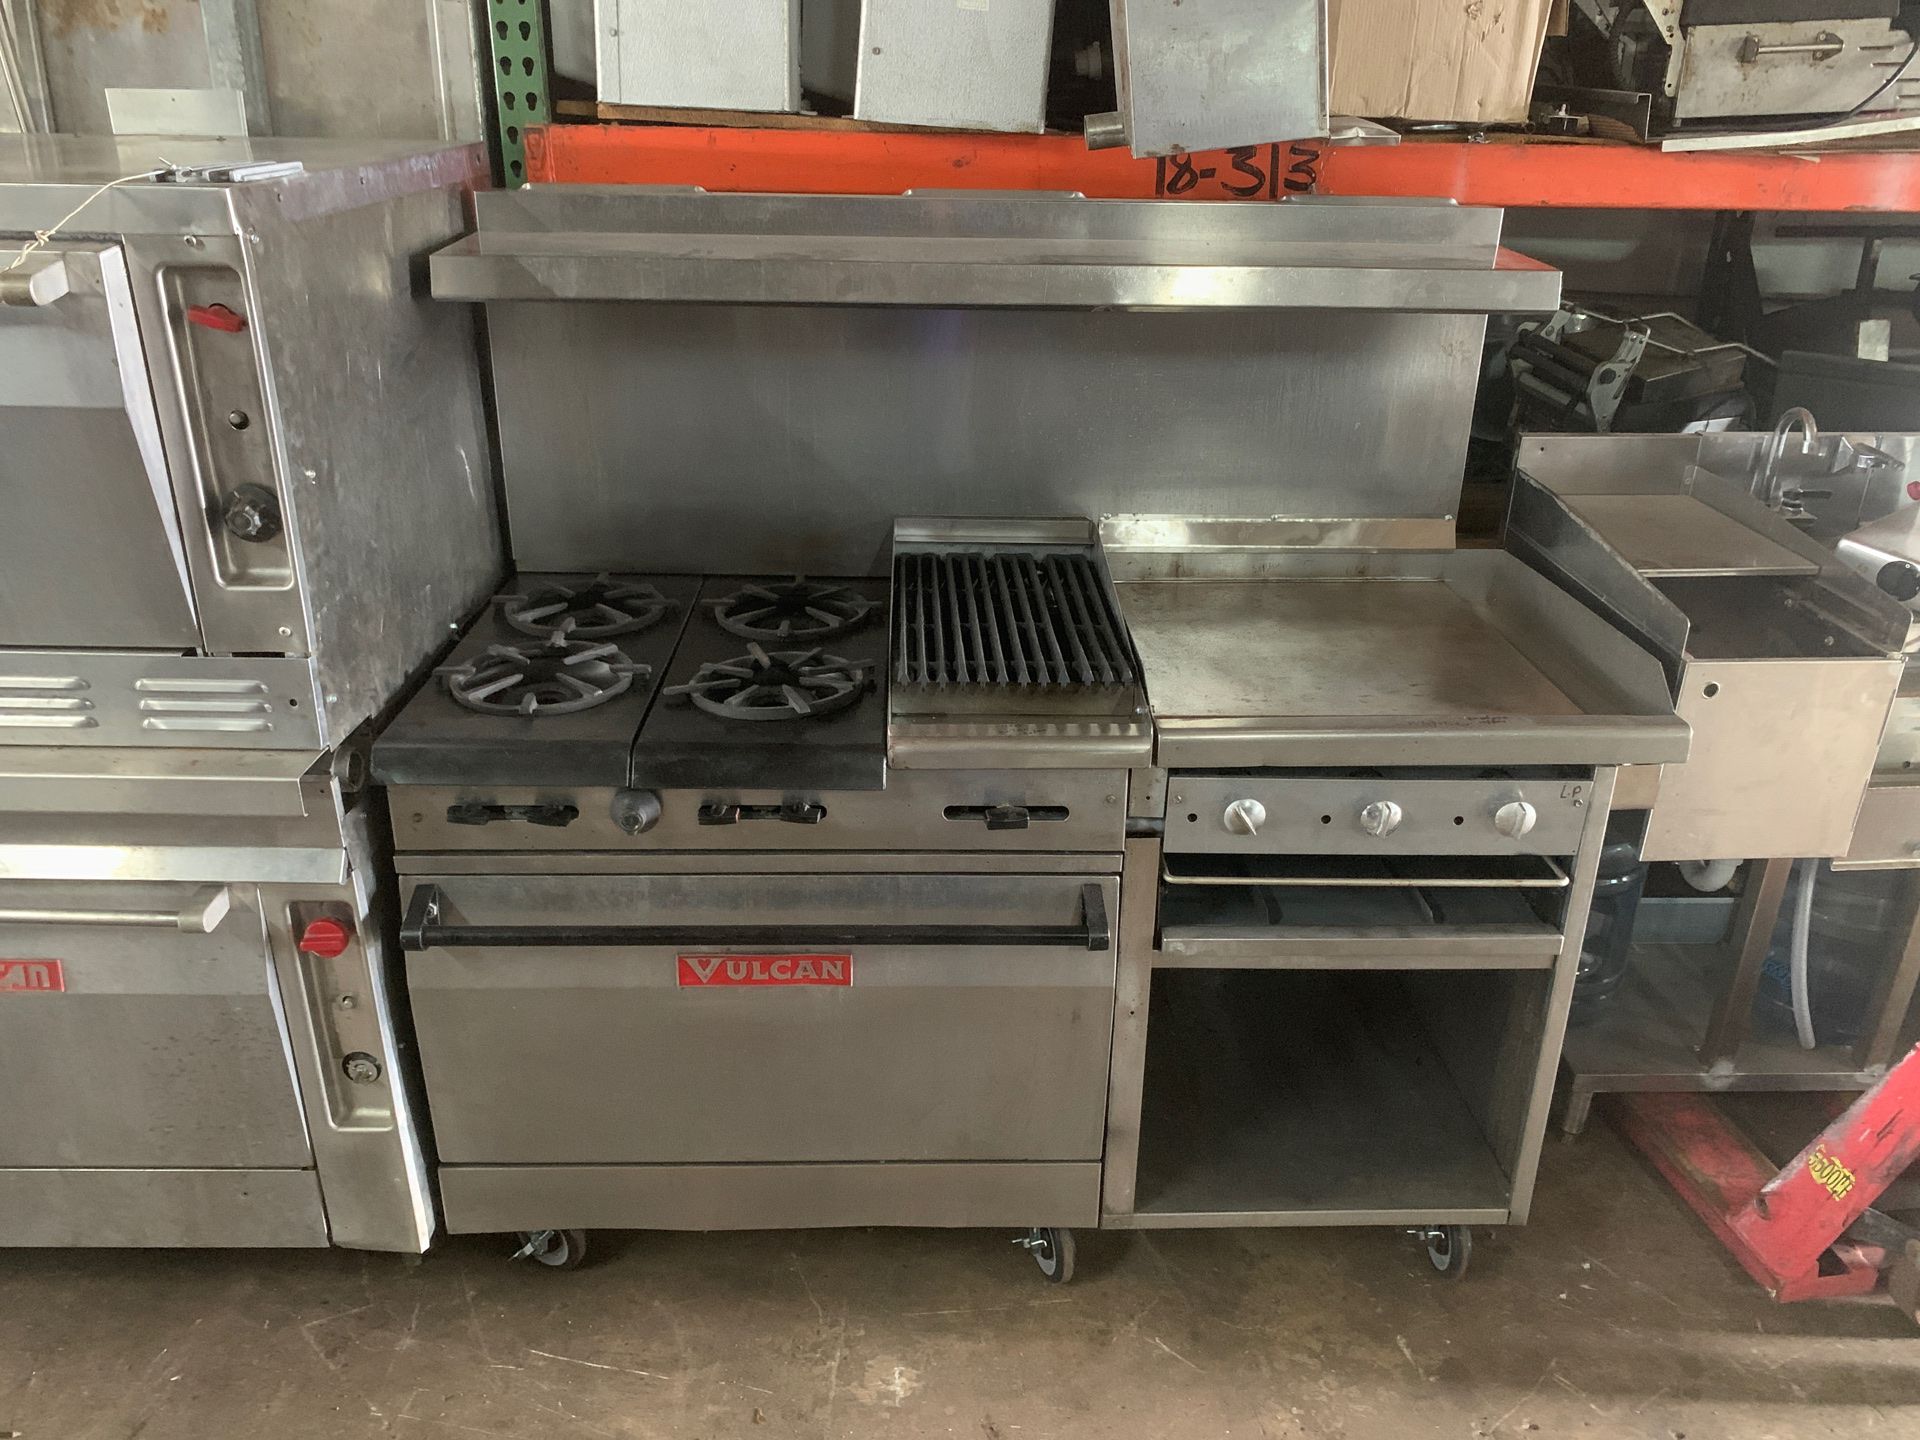 USED VULCAN 4 BURNER GAS OVEN STOVE WITH 12” CHARBROILER & 24” GRIDDLE *NEW & USED RESTAURANT EQUIPMENT